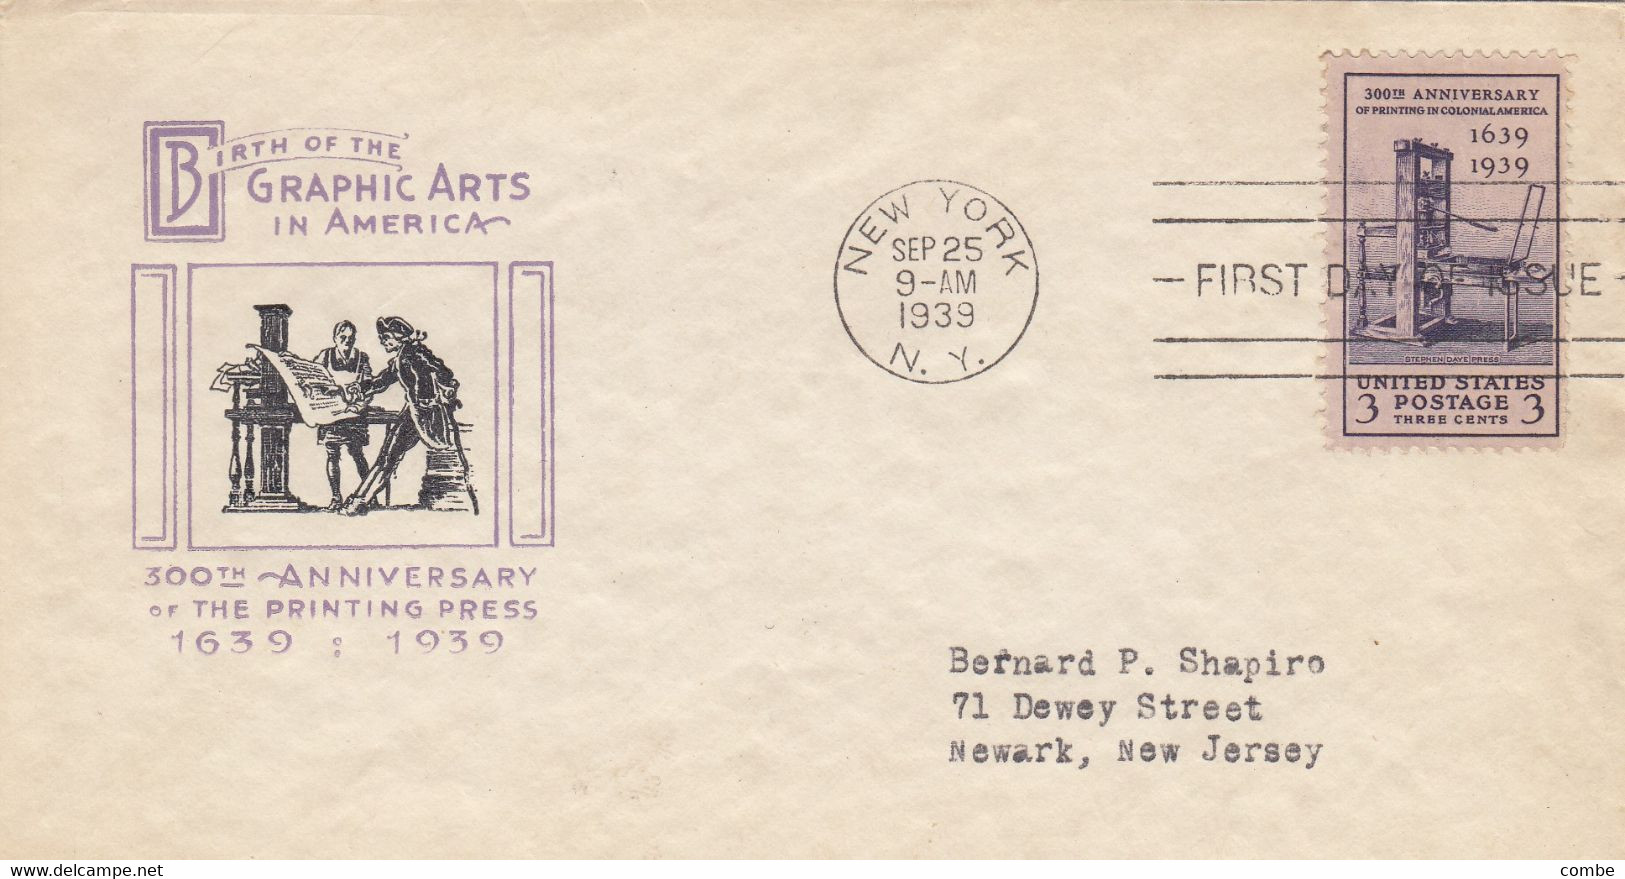 COVER. US. FDC. 25 SEP 39. BIRTH OF THE GRAPHIC ARTS IN AMERICA. NEW YORK - 1851-1940